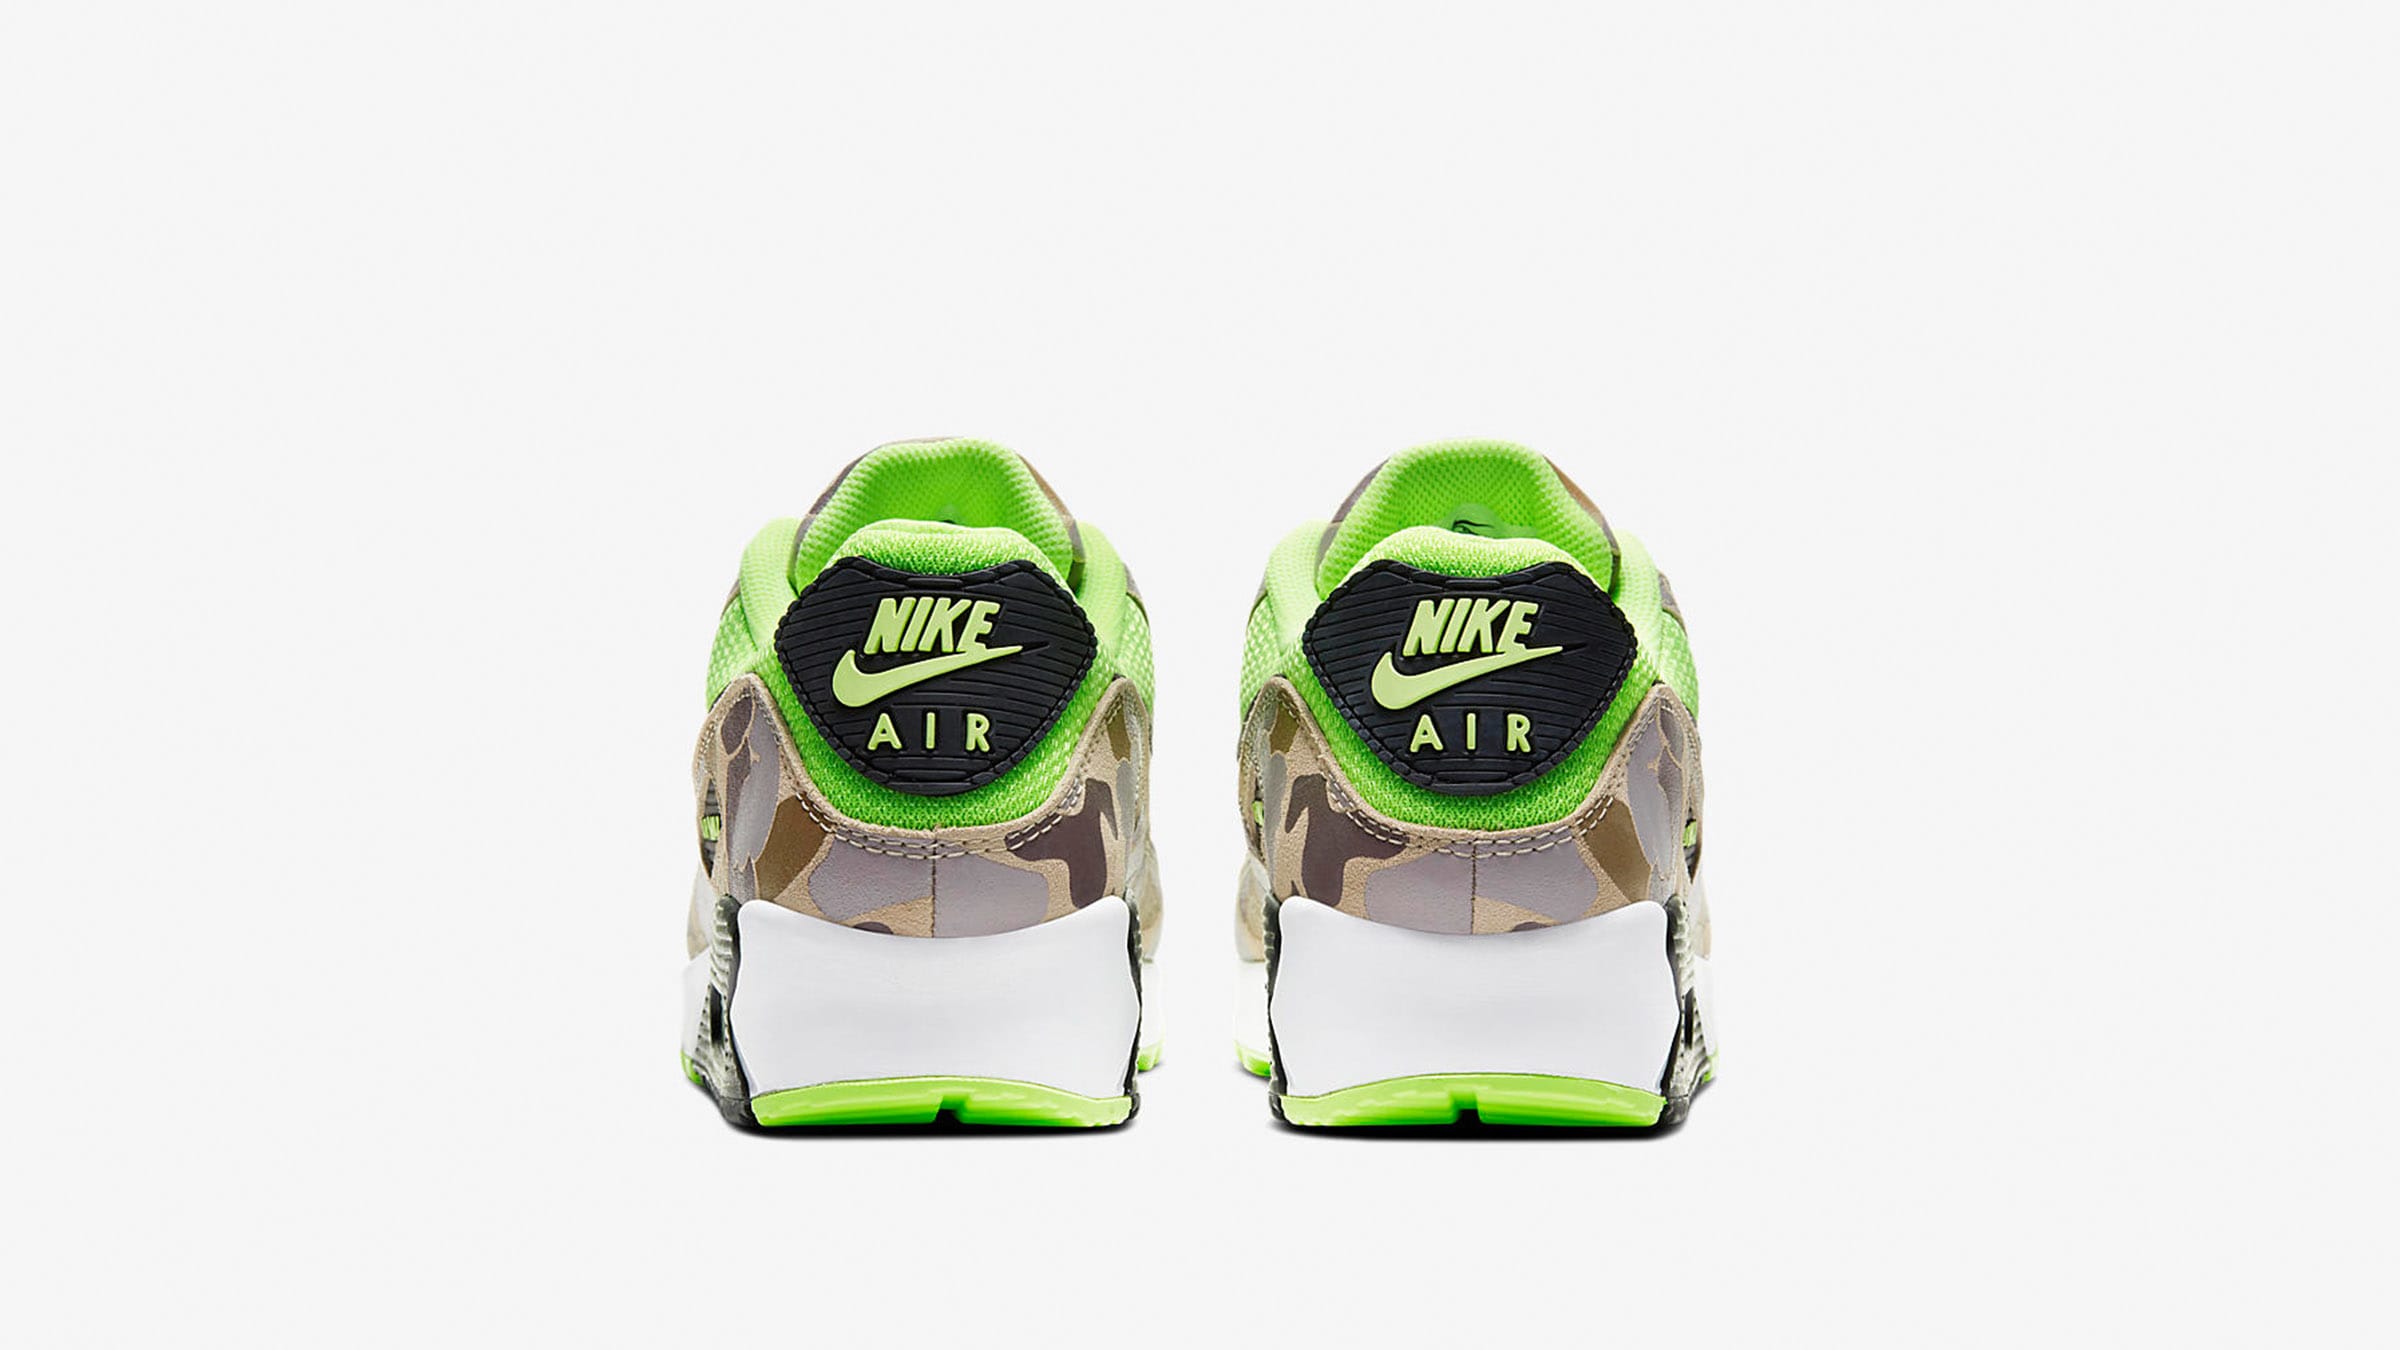 Nike Air Max 90 SP (Ghost Green & Black) | END. Launches